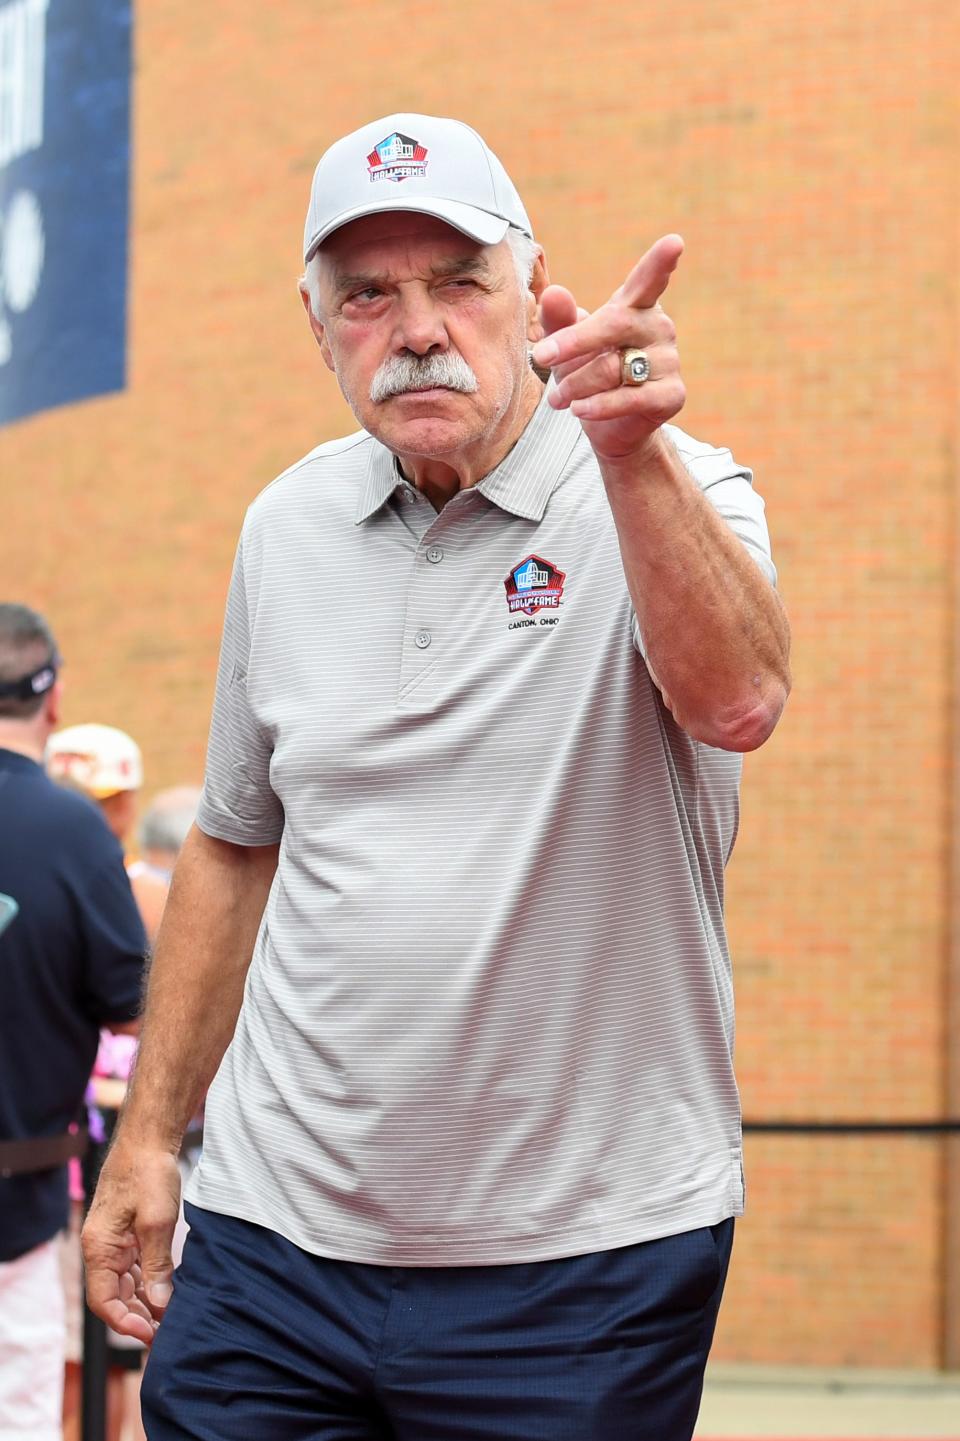 Hall of Fame fullback Larry Csonka celebrates with fans as he is introduced prior to the 2022 Pro Hall of Fame Enshrinement Ceremony at Tom Benson Hall of Fame Stadium on Aug. 6, 2022 in Canton, Ohio.